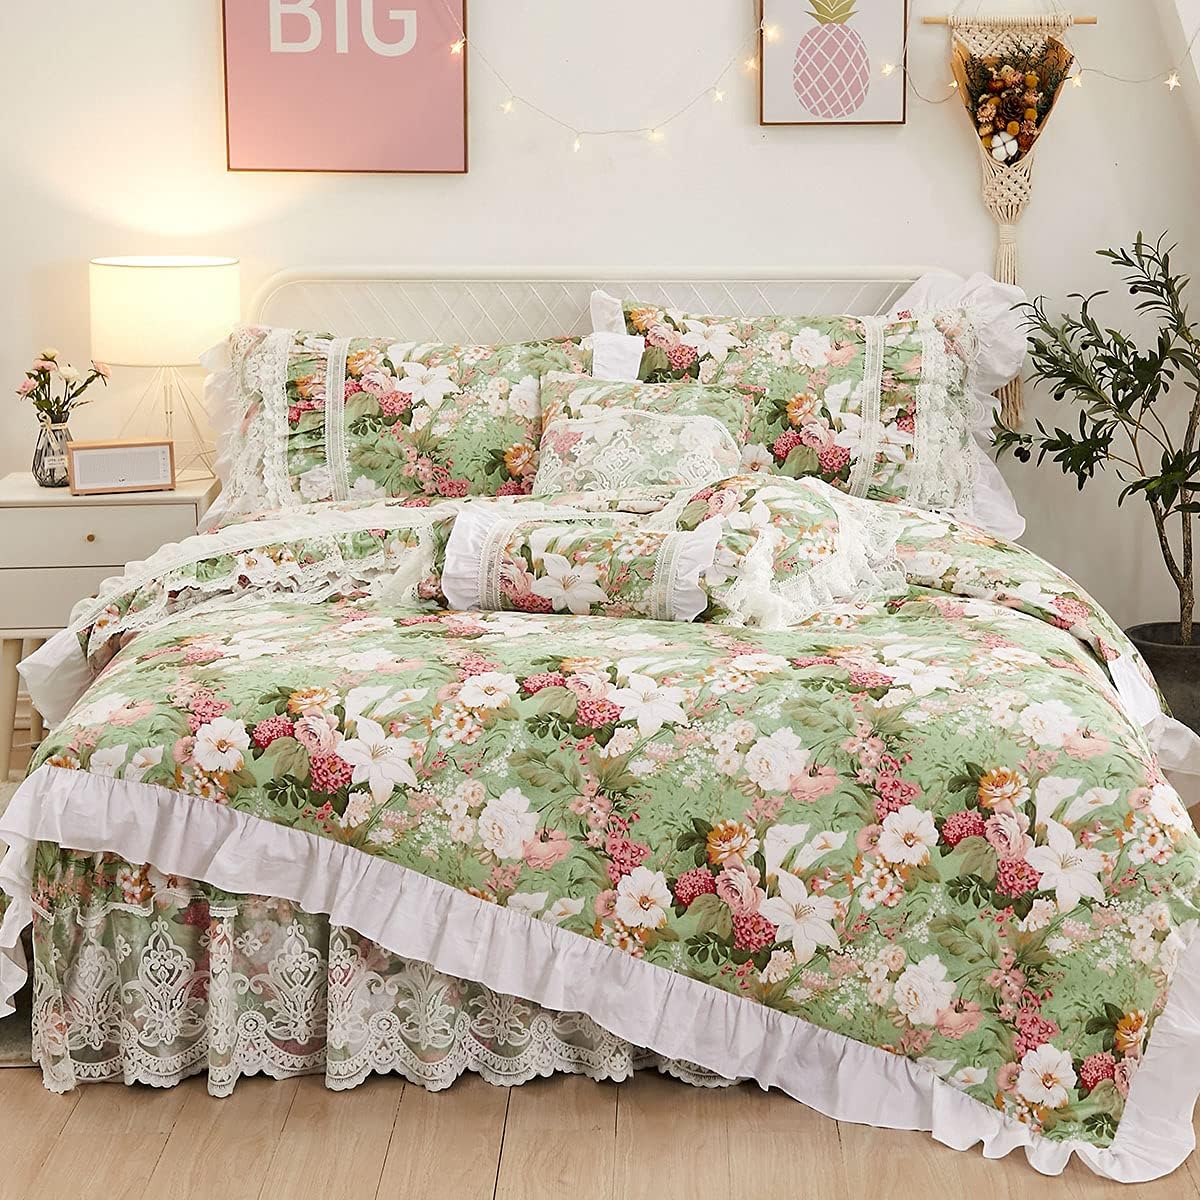 FADFAY French Country Bedding Set Queen Cotton Floral Duvet Cover 4 Piece- White Lace Luxury Princess Farmhouse Dust Ruffle 18'' Split Corner Bed Skirt